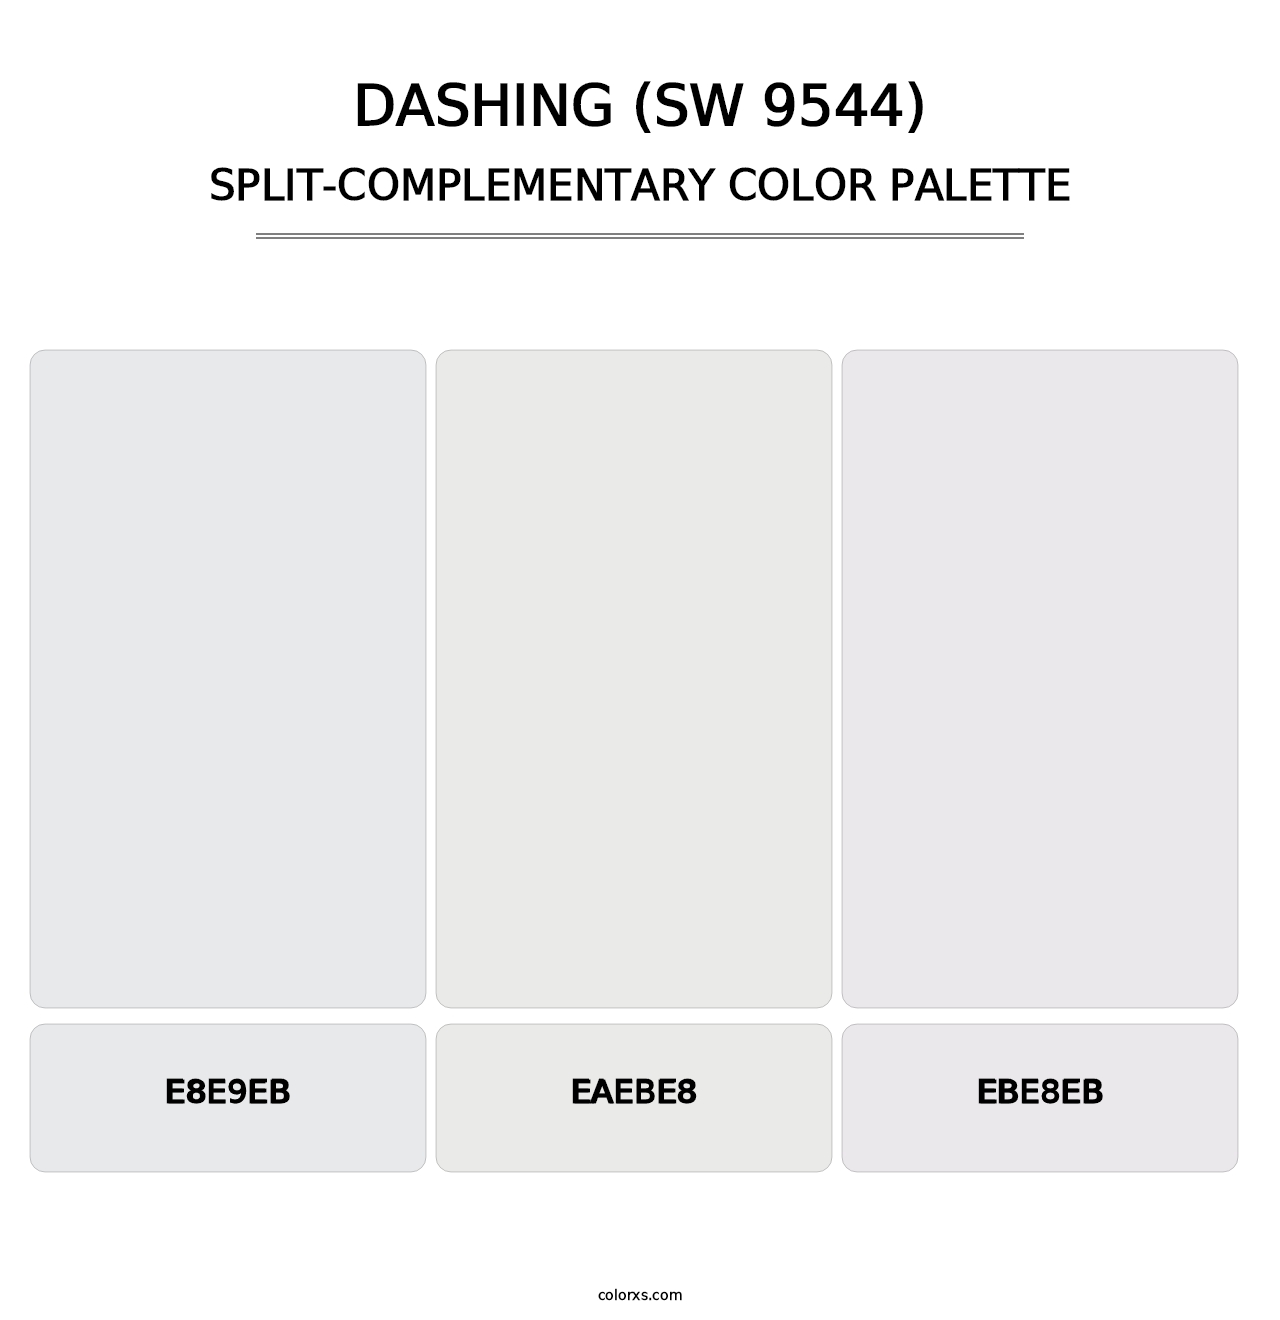 Dashing (SW 9544) - Split-Complementary Color Palette